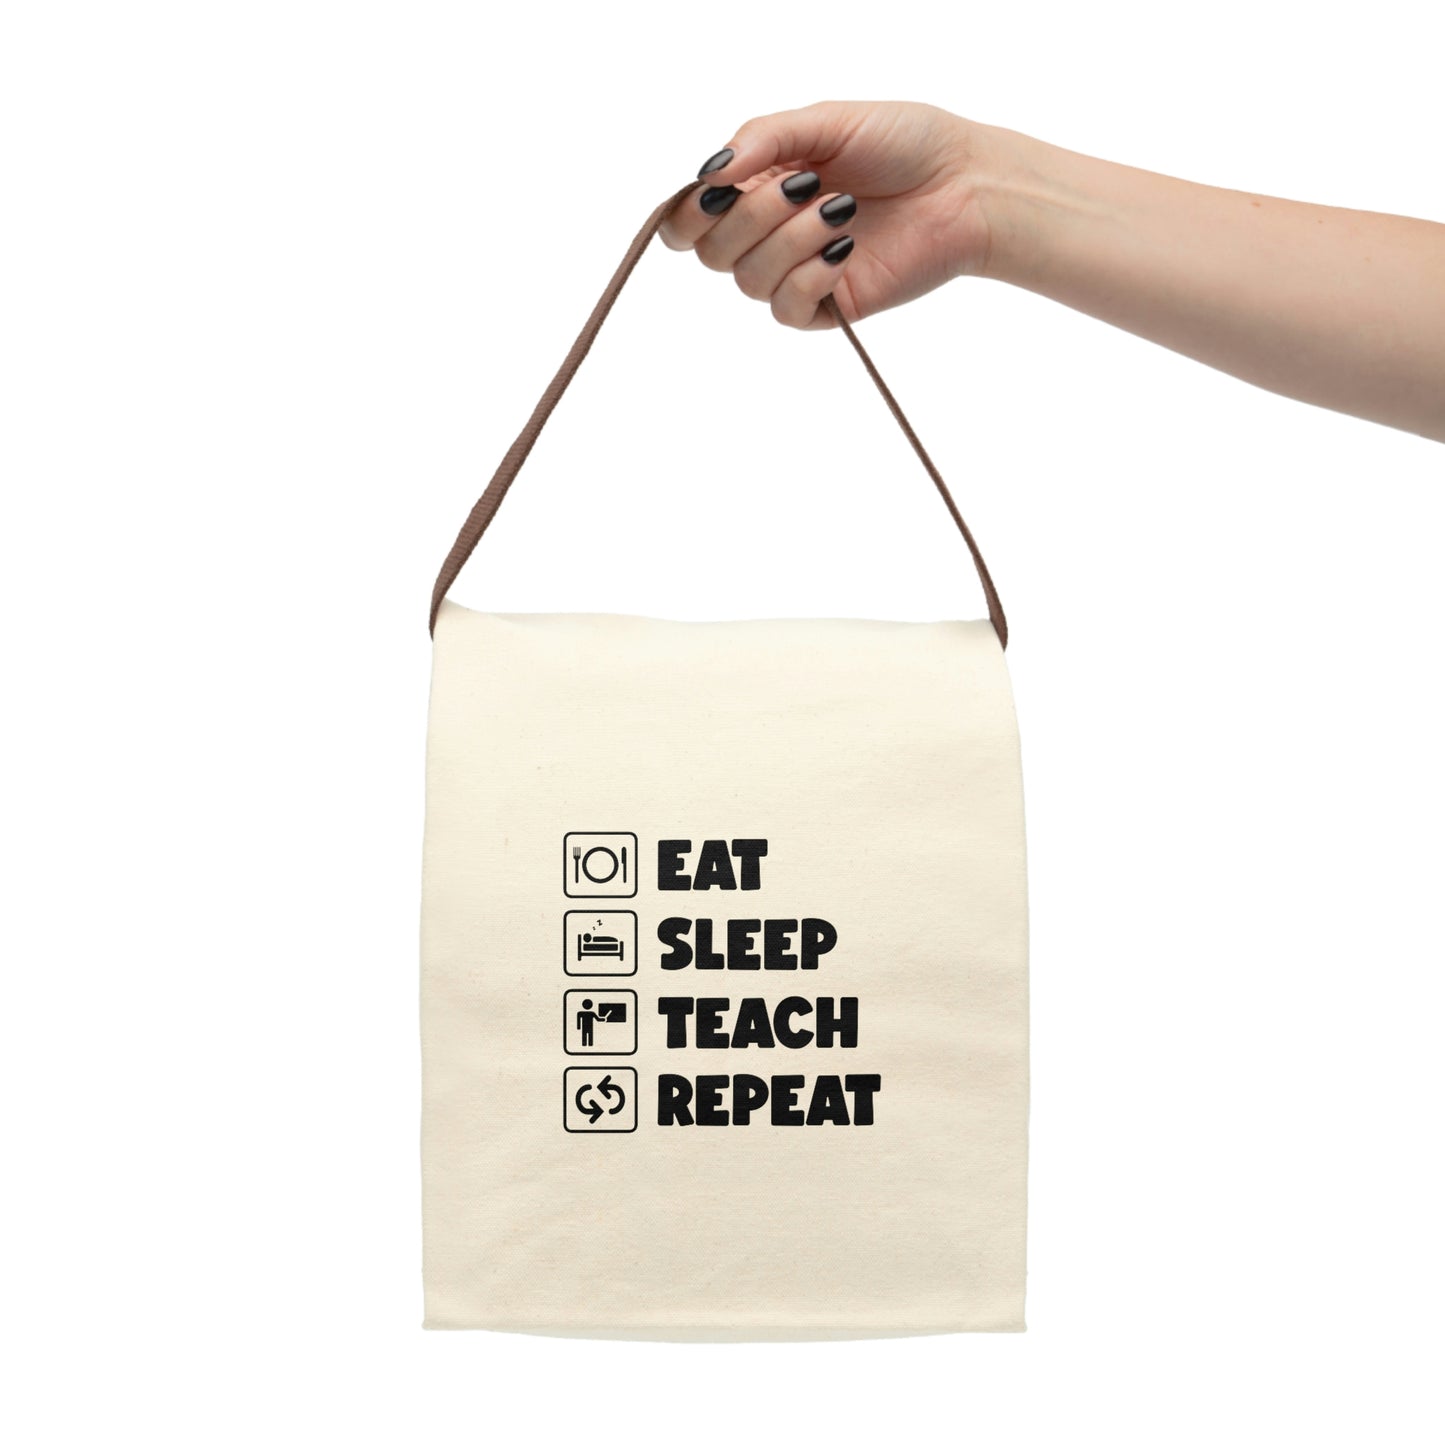 Eat, Sleep, Teach, Repeat" Canvas Lunch Bag With Strap